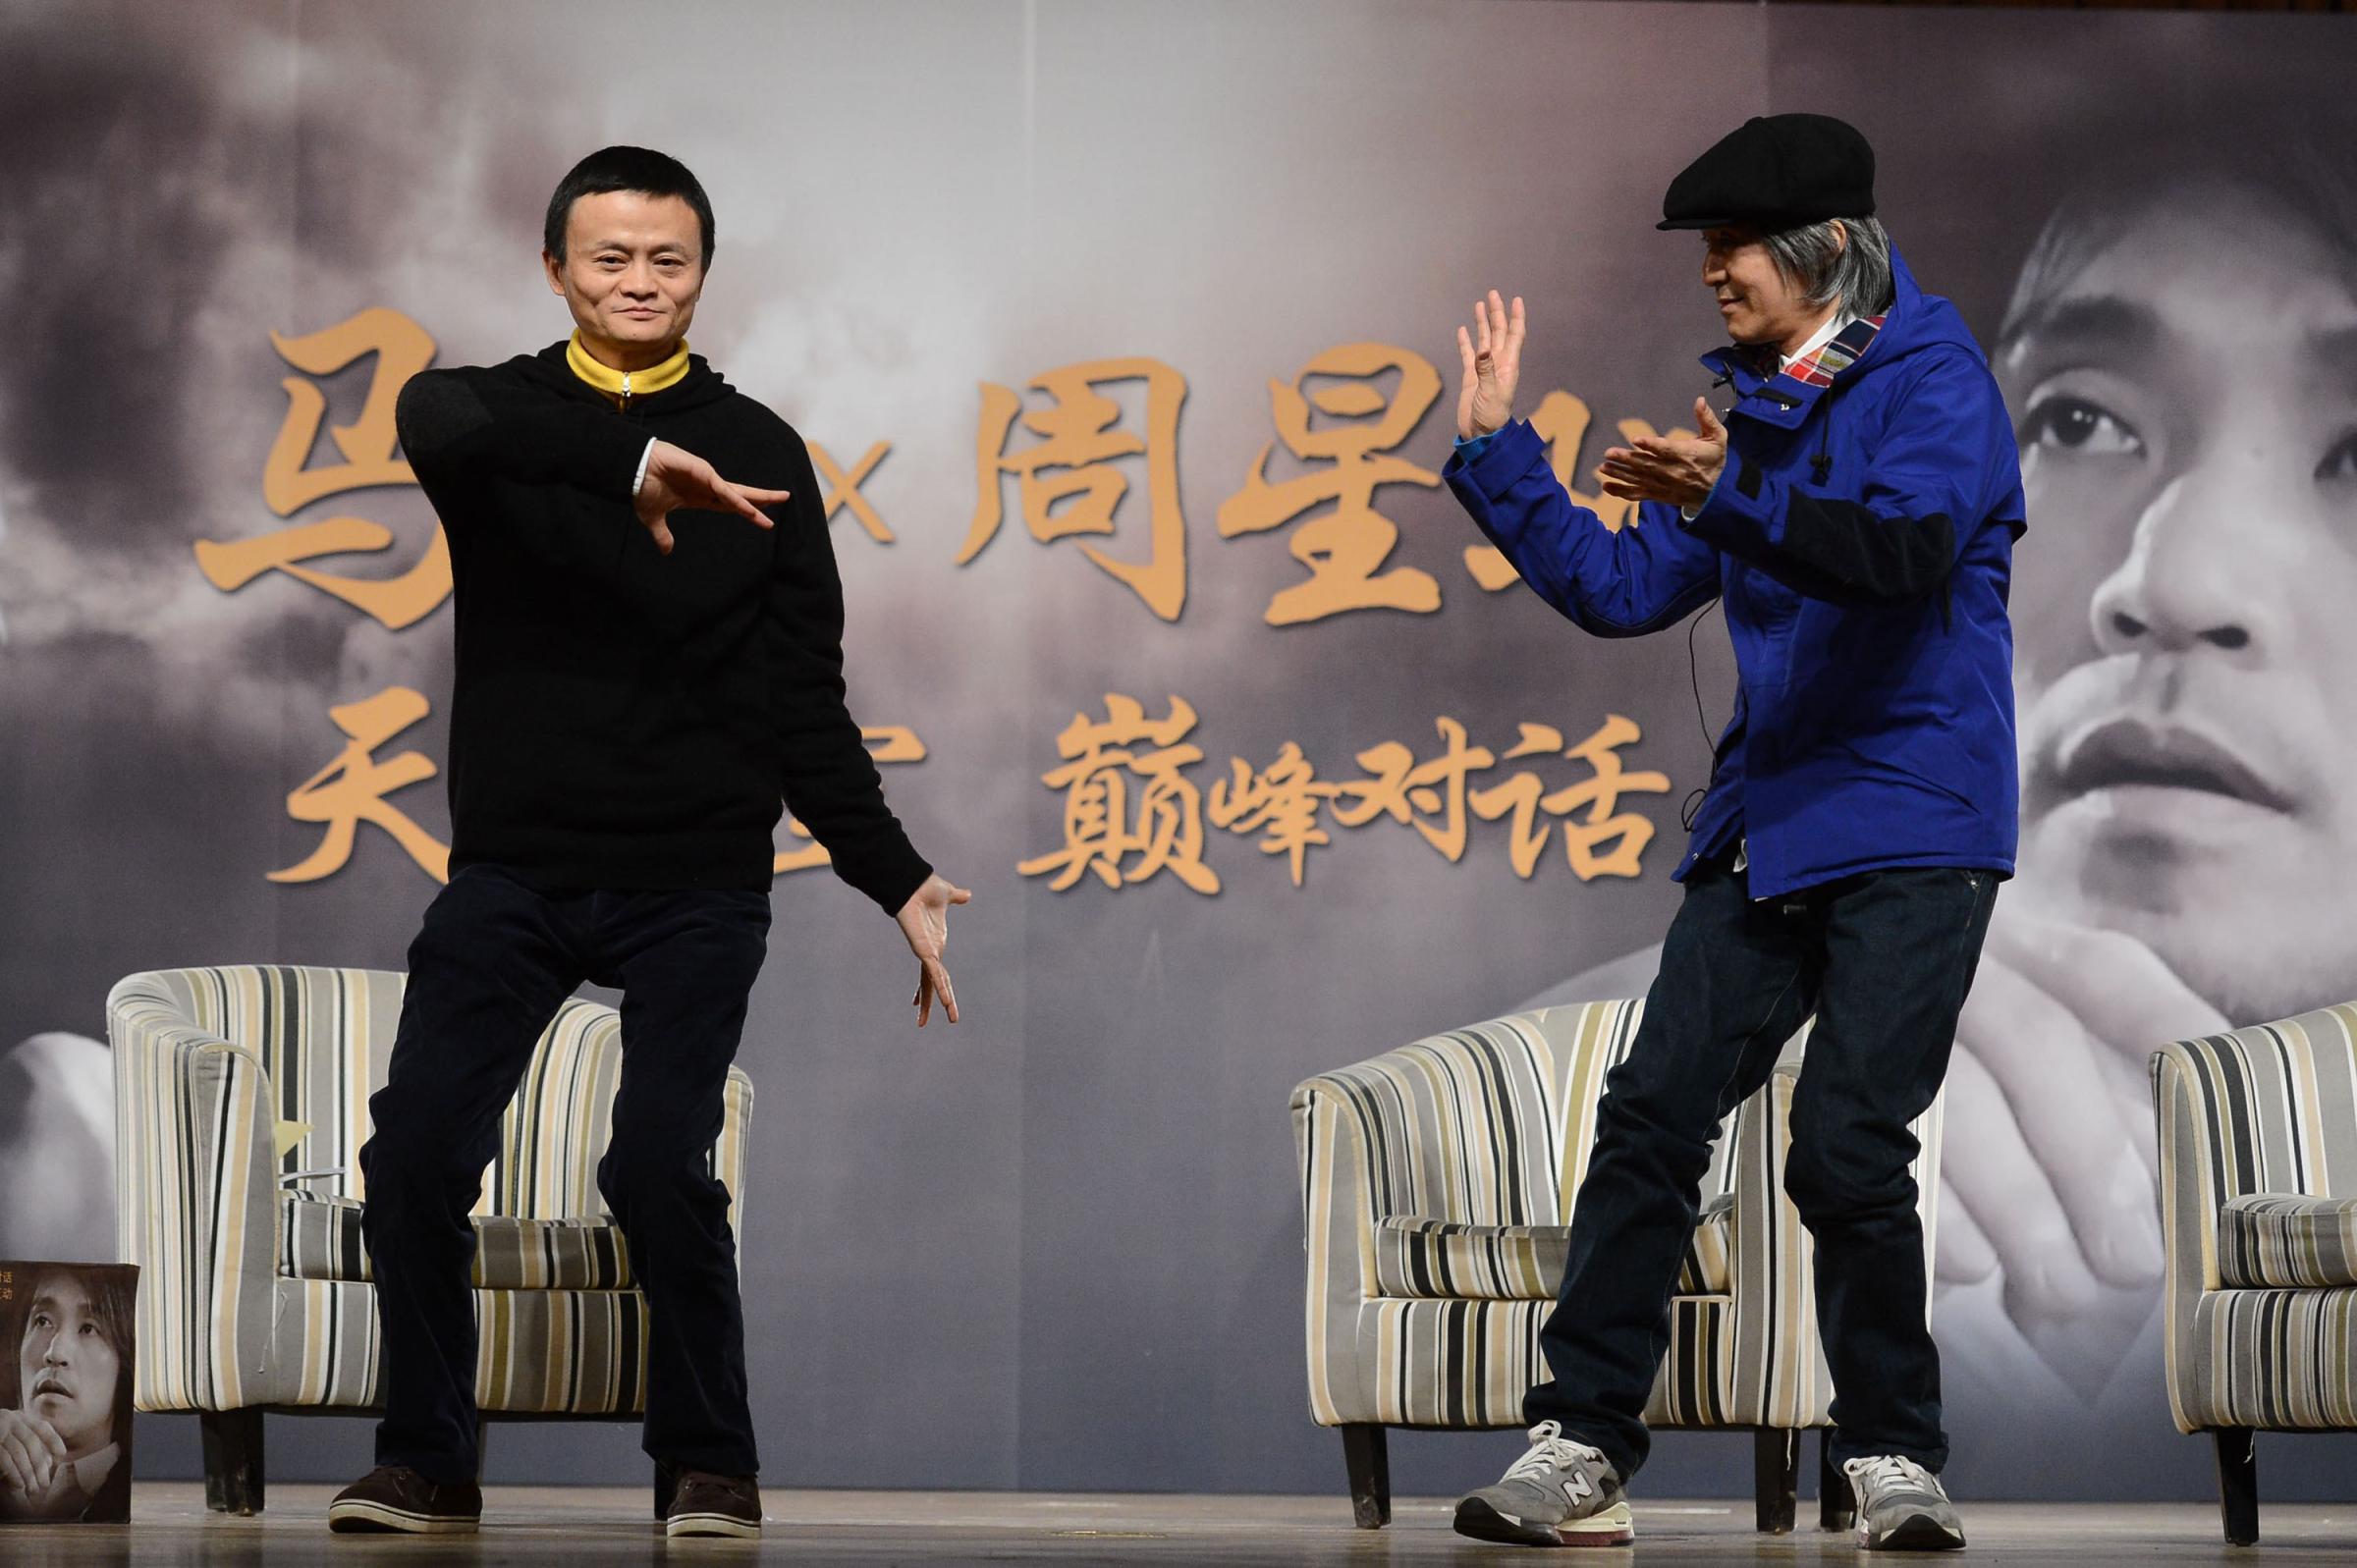 Stephen Chow and Jack Ma Hold Dialogue in Beijing